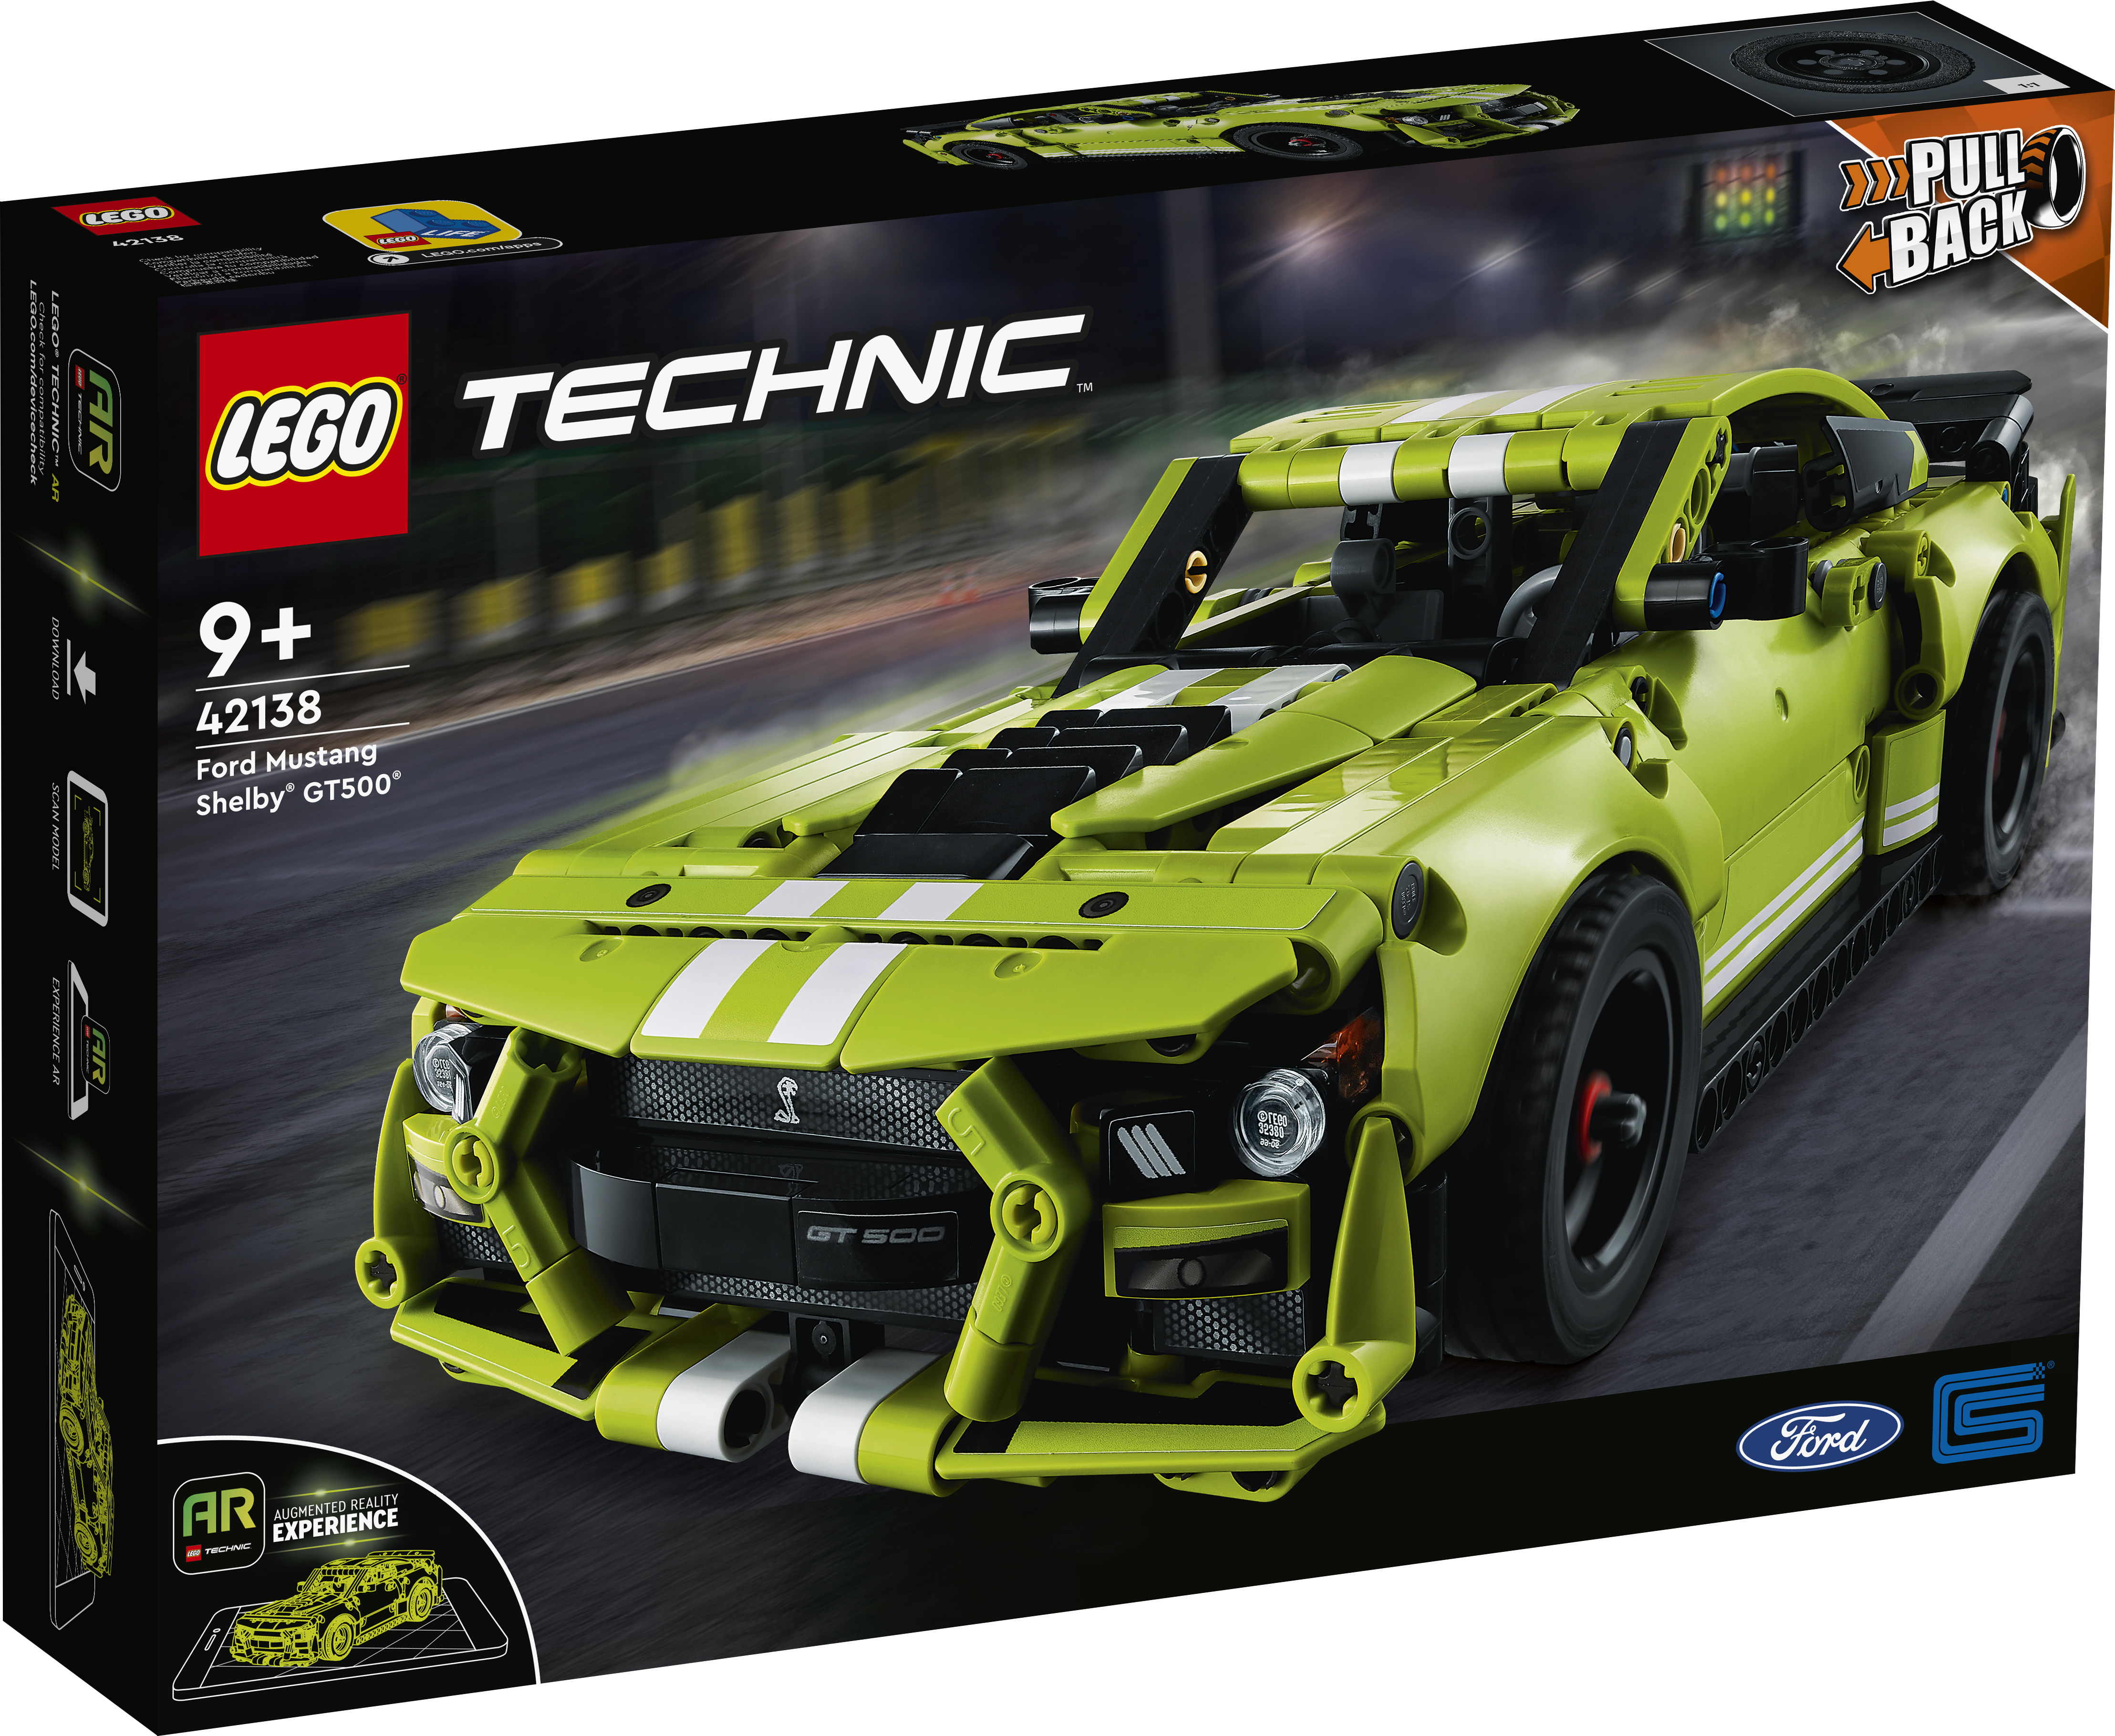  Technic Ford Mustang Shelby® Gt500® - 42138